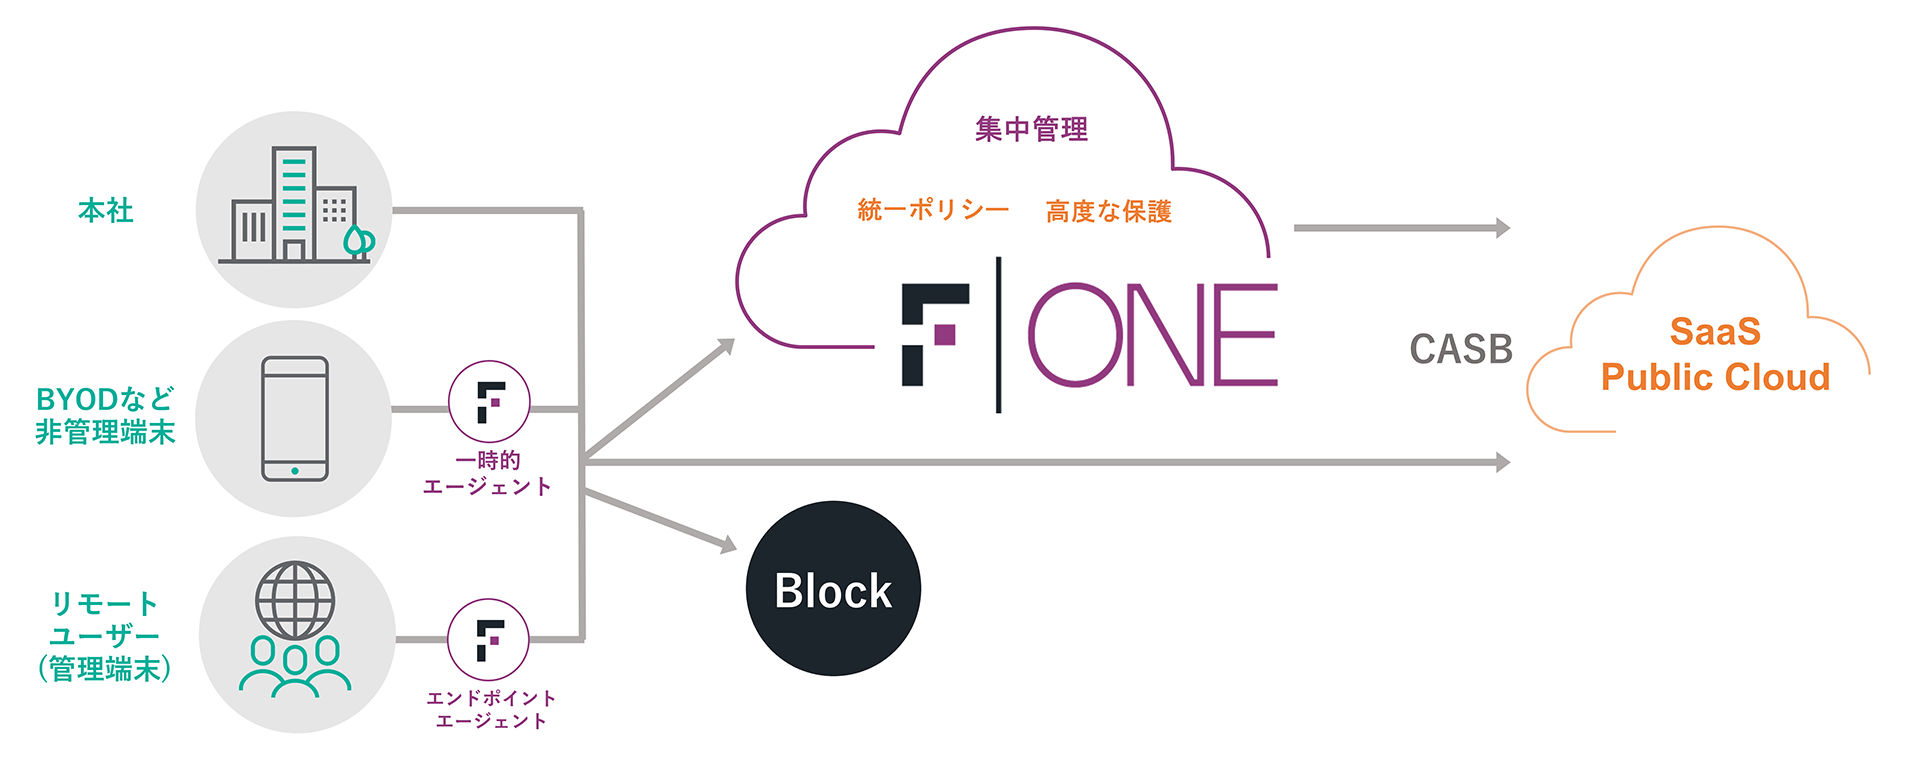 Forcepoint One CASB 様々な接続形式に対応